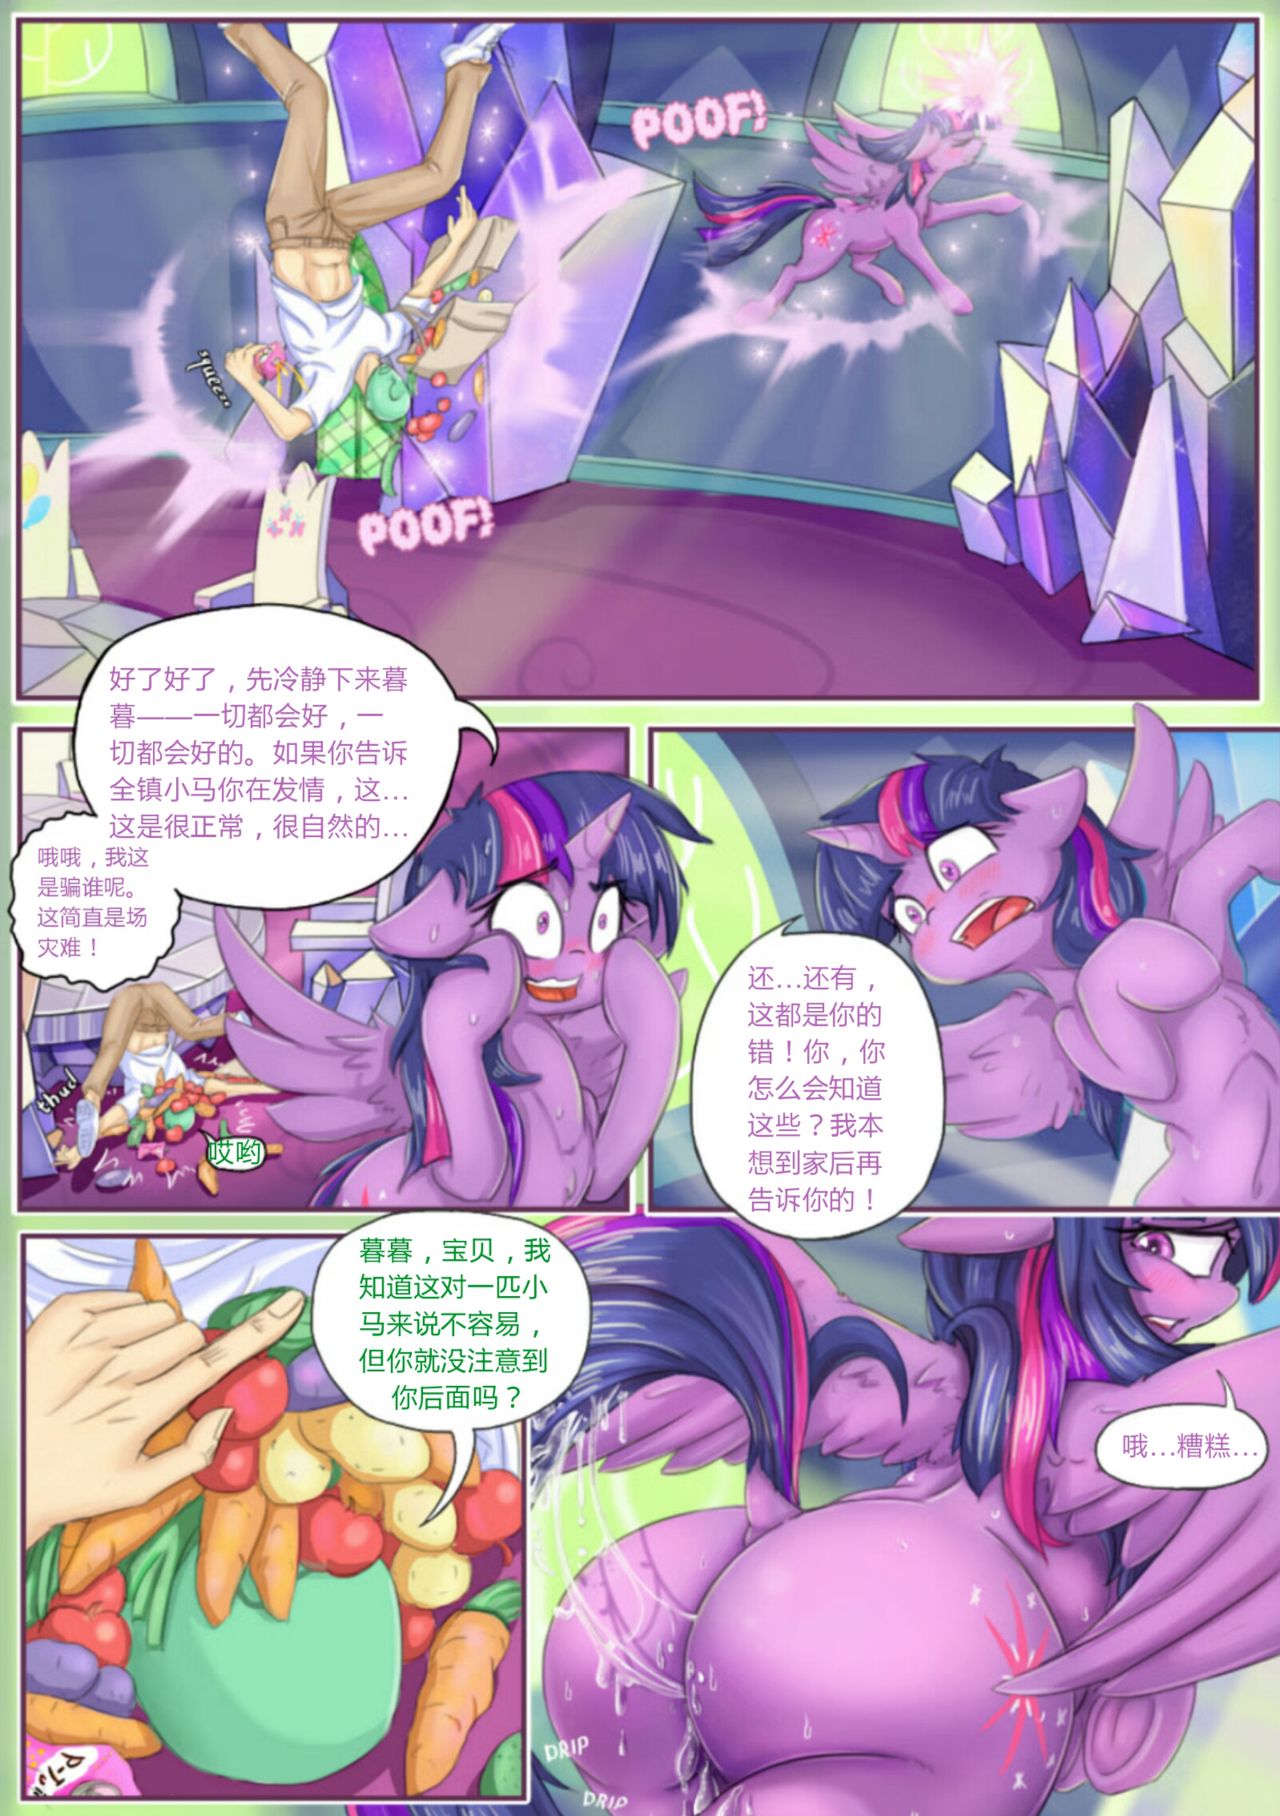 [alcor] A Display of Passion | 演绎激情 (My Little Pony Friendship Is Magic) [Chinese] [司协汉化] [Ongoing] 【司協漢化】演繹激情